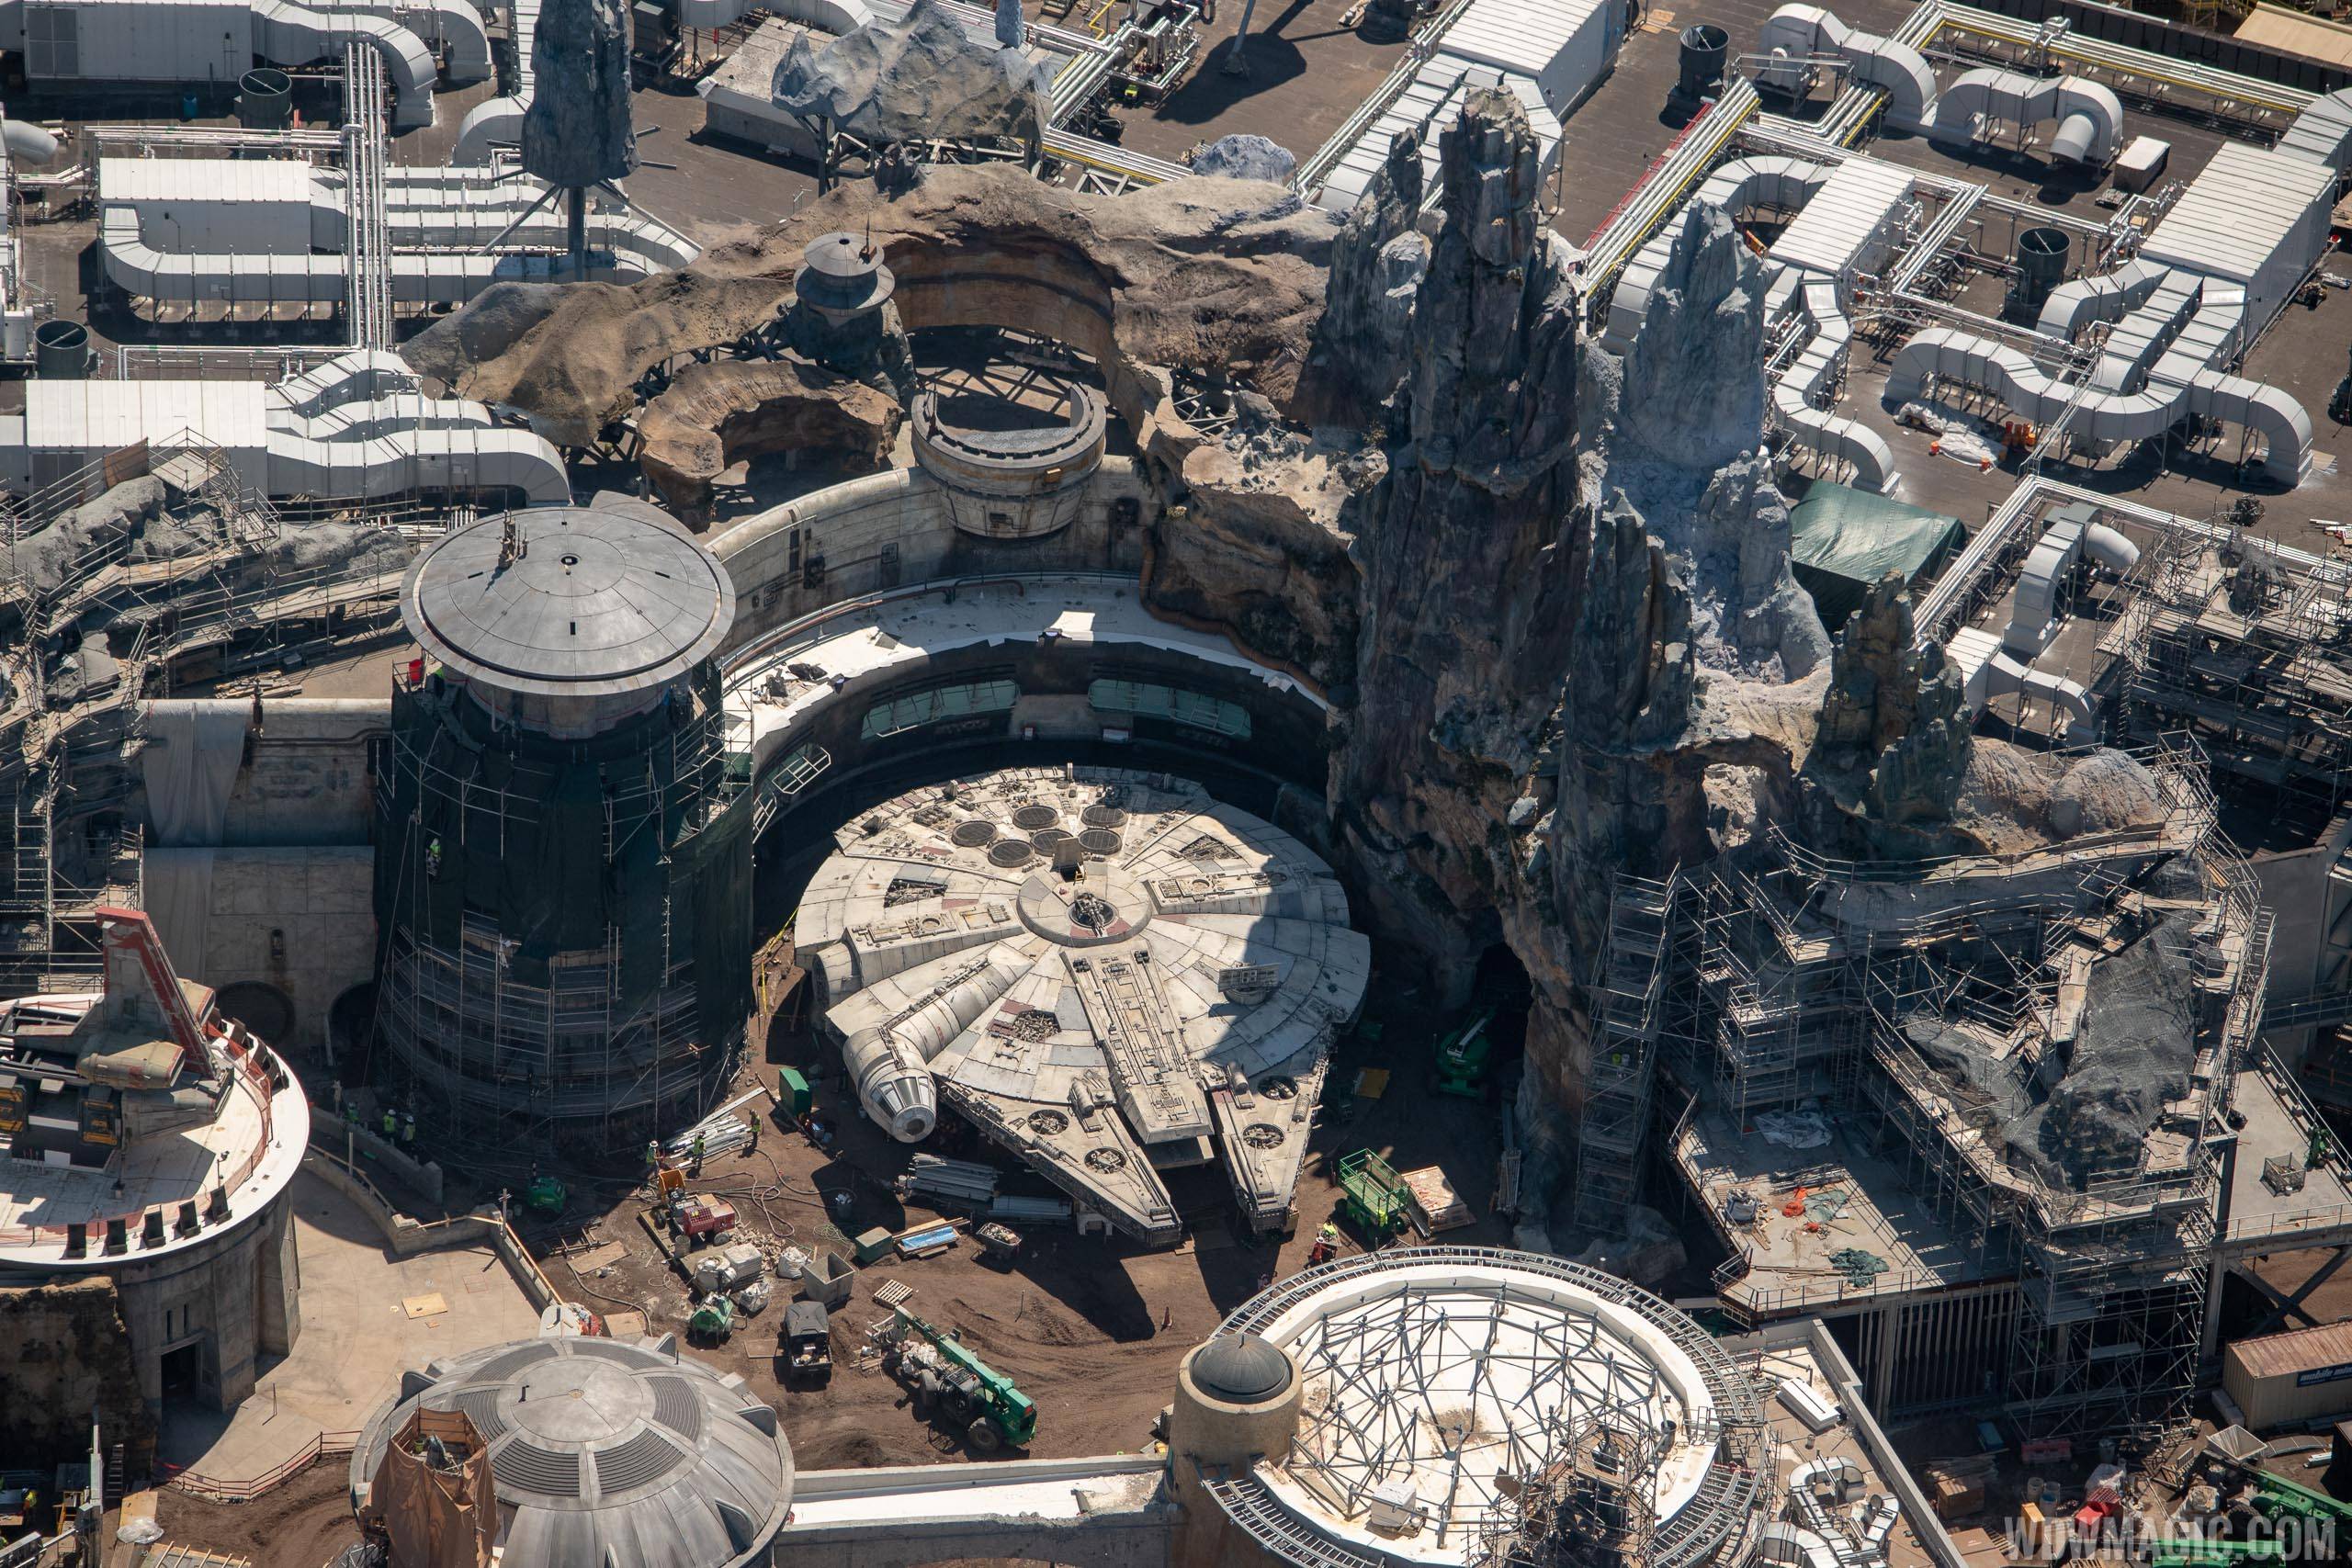 PHOTOS - Star Wars Galaxy's Edge aerial construction pictures from Walt Disney World